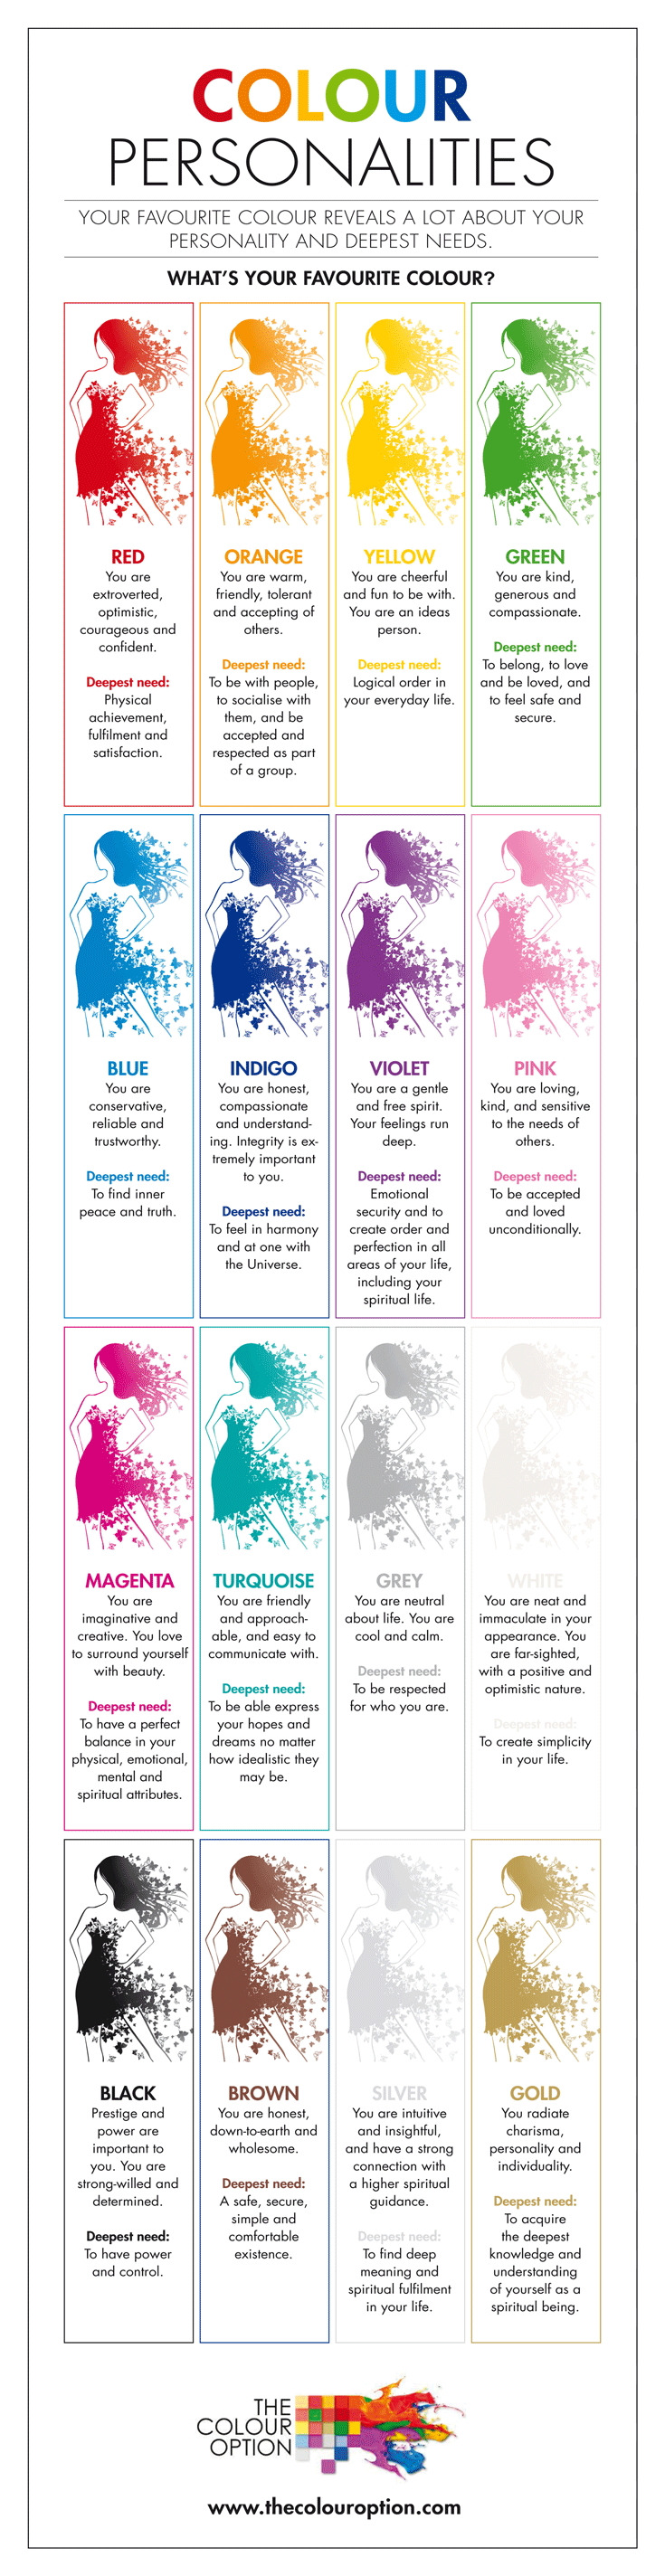 favorite color personality test infographic